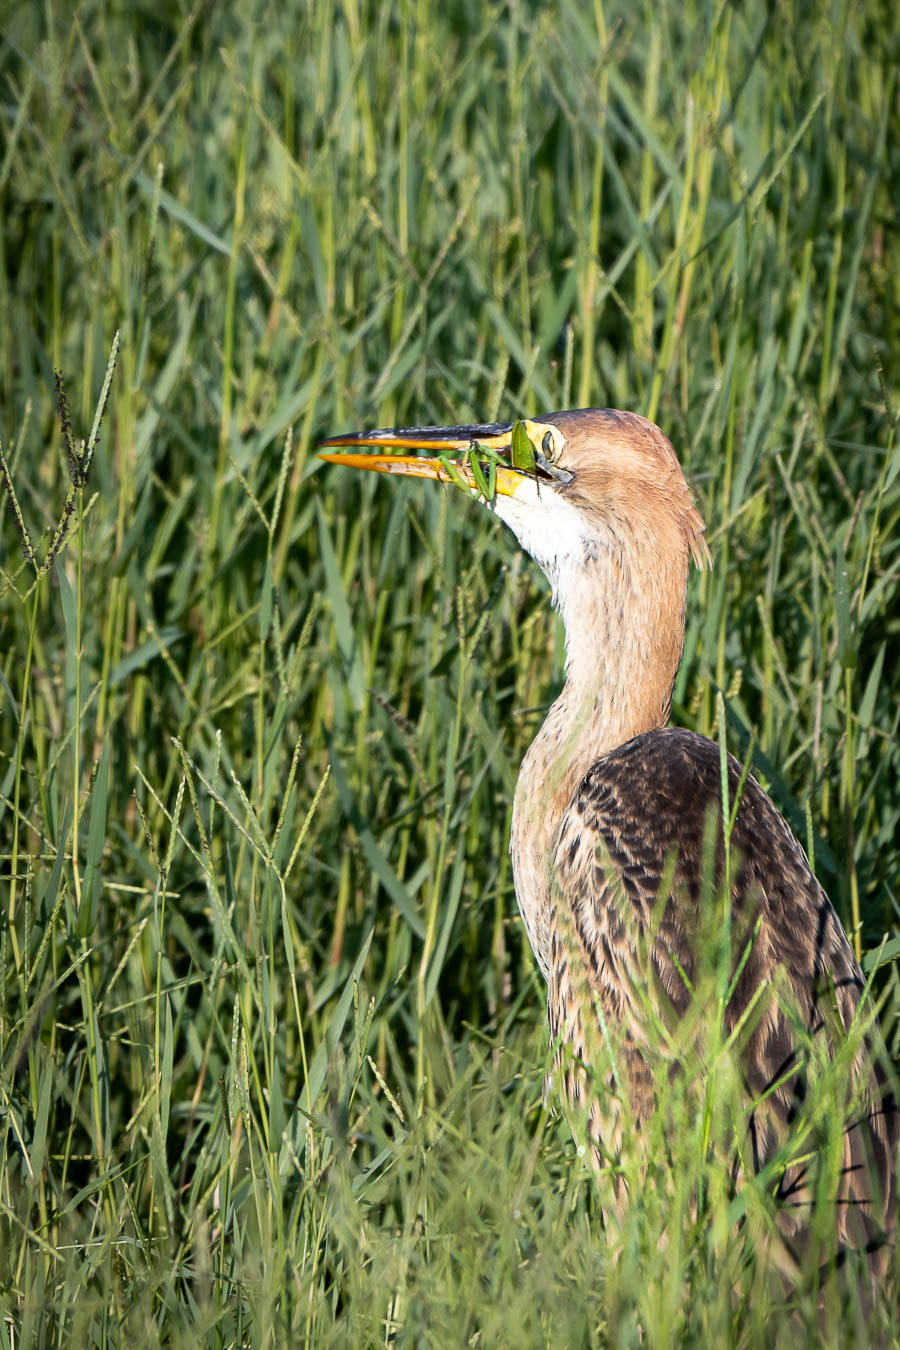 Purple heron for lunch with a mantis...